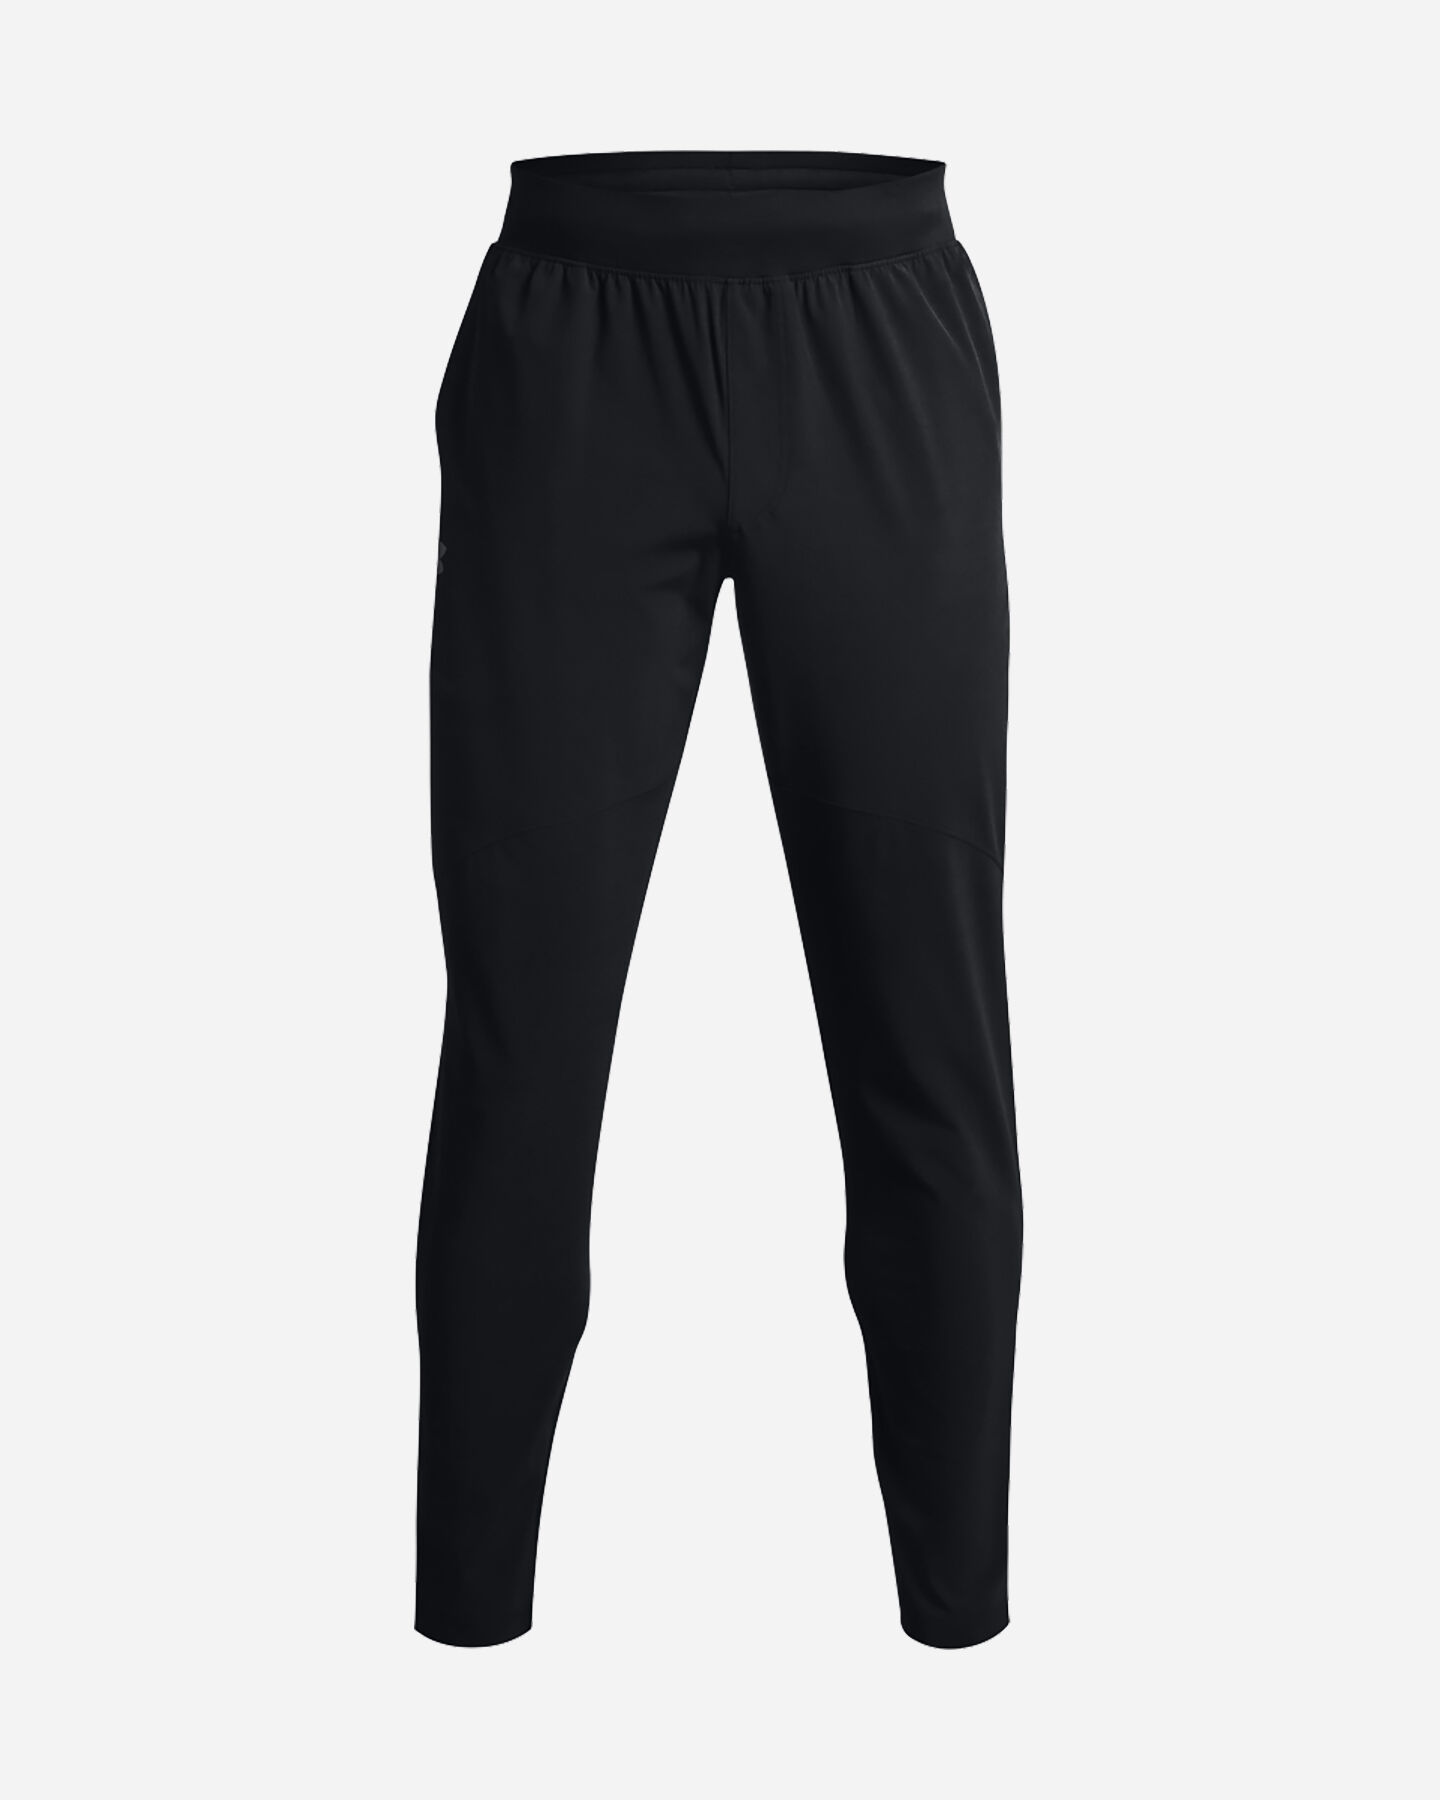  Pantalone training UNDER ARMOUR STRETCH WOVEN M S5336577 scatto 0